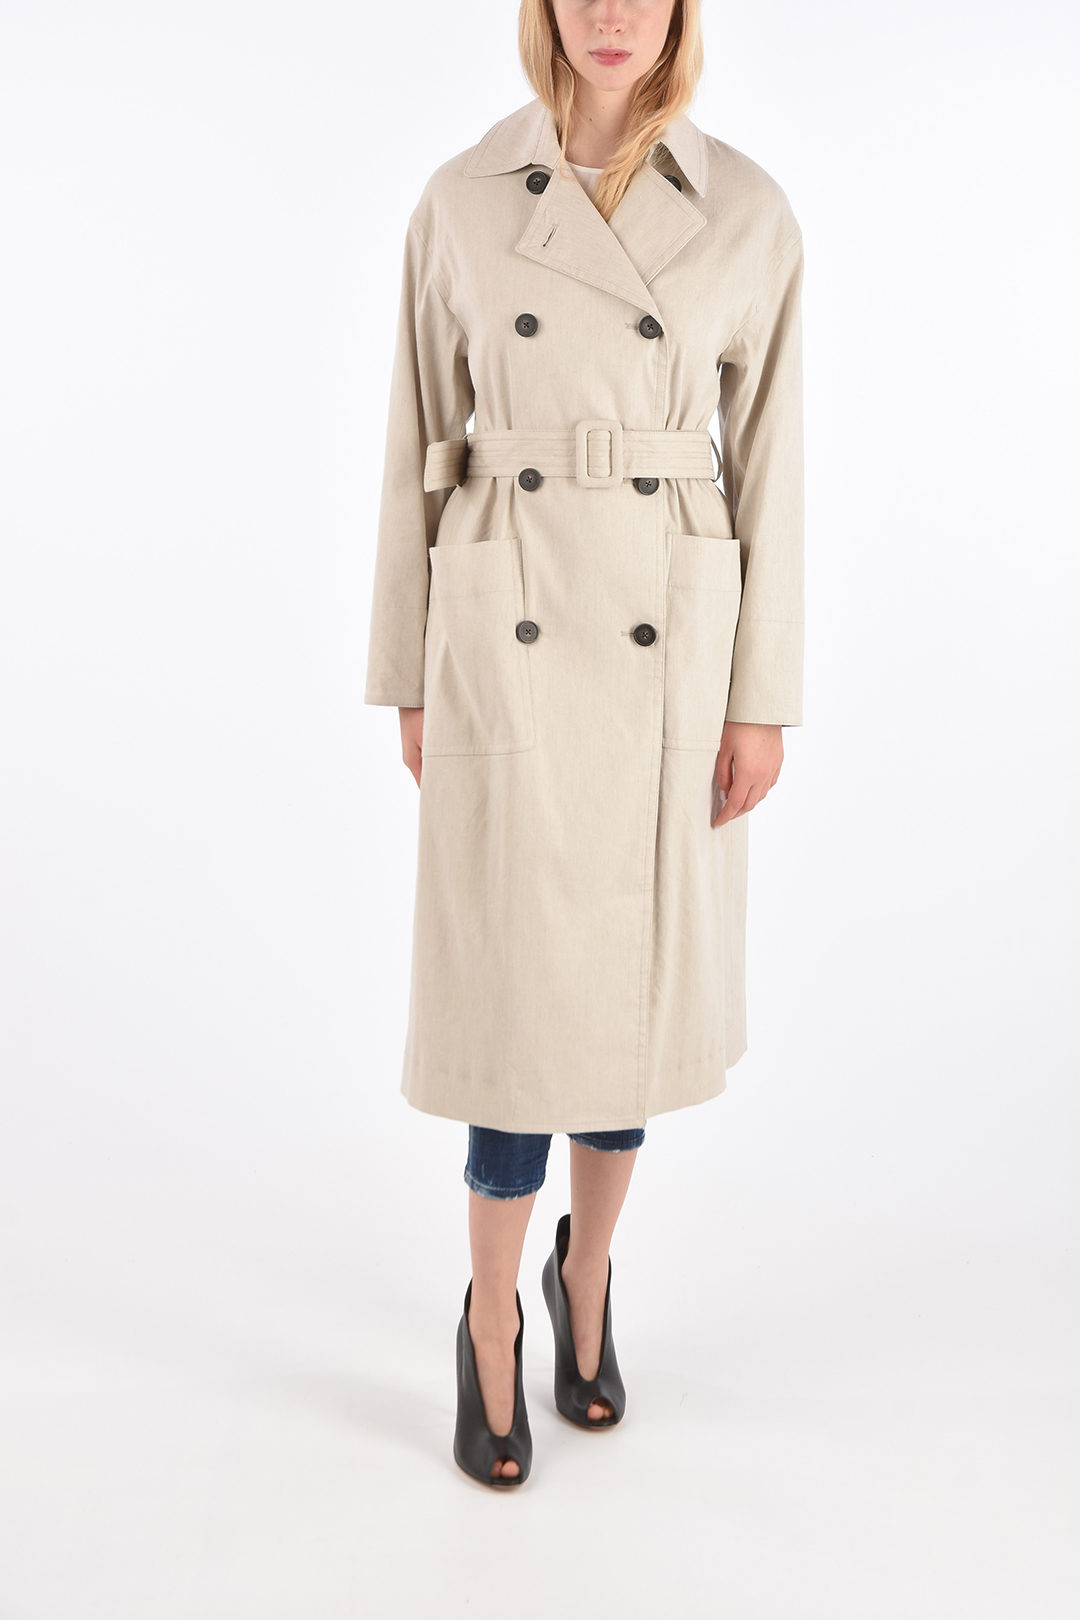 Vince. flax double breasted Chesterfield coat with belt women - Glamood ...